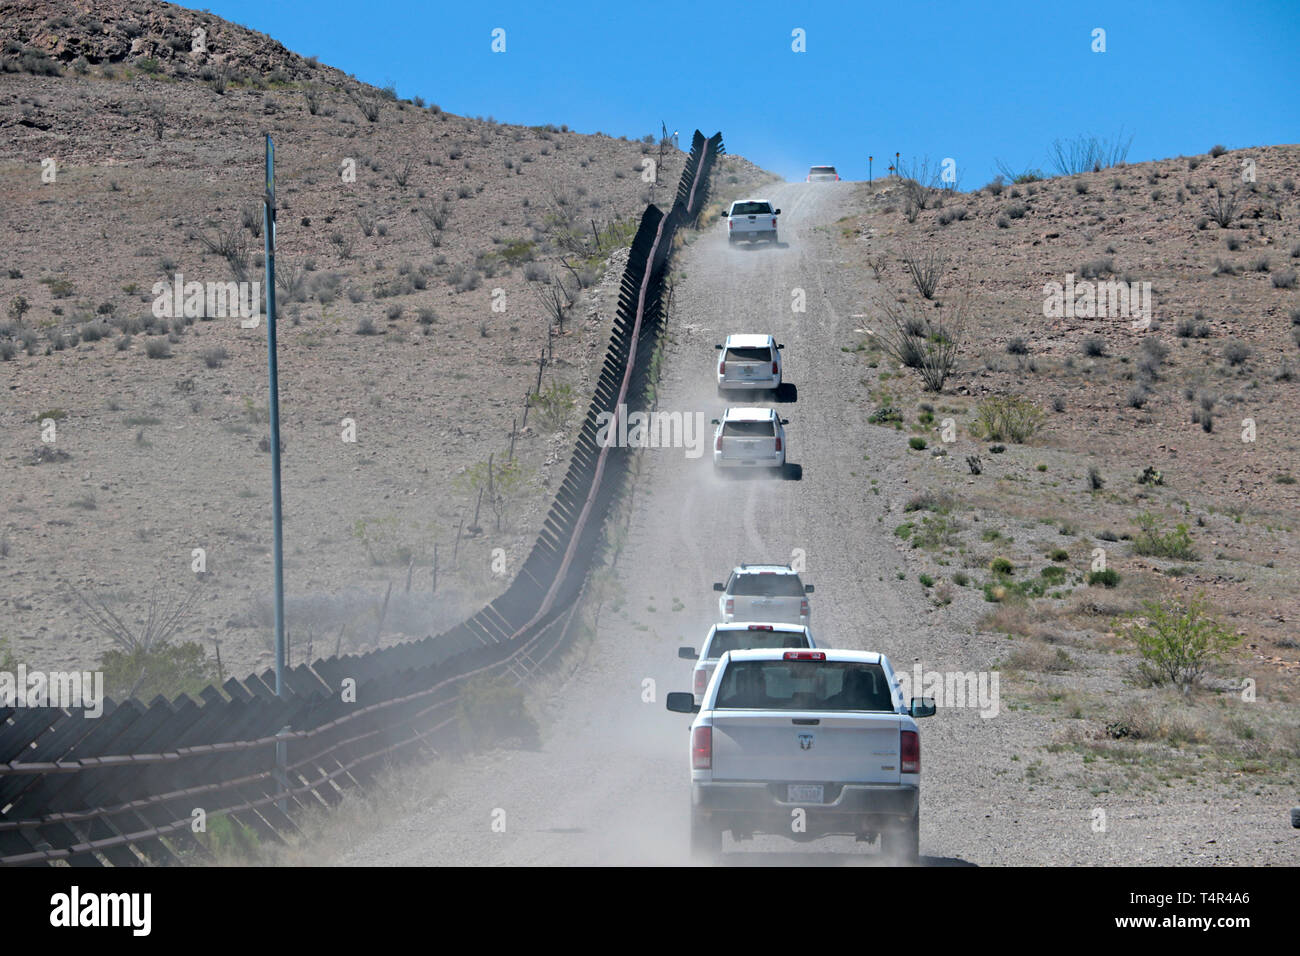 A caravan of vehicles with a team of U.S. Army Corps of Engineers employees and contractors drive along a long row of existing Normandy-style vehicle barrier near Columbus, New Mexico, April 11. USACE is supporting the Department of Homeland Security's request to build pedestrian fencing, construct and improve roads, and install lighting within the Yuma, Arizona, and El Paso, Texas, U.S. Border Patrol sectors following the Feb. 15 national emergency declaration on the southern border of the United States. The Department of Defense has the authority under Section 284 of Title 10, U.S. Code, to  Stock Photo